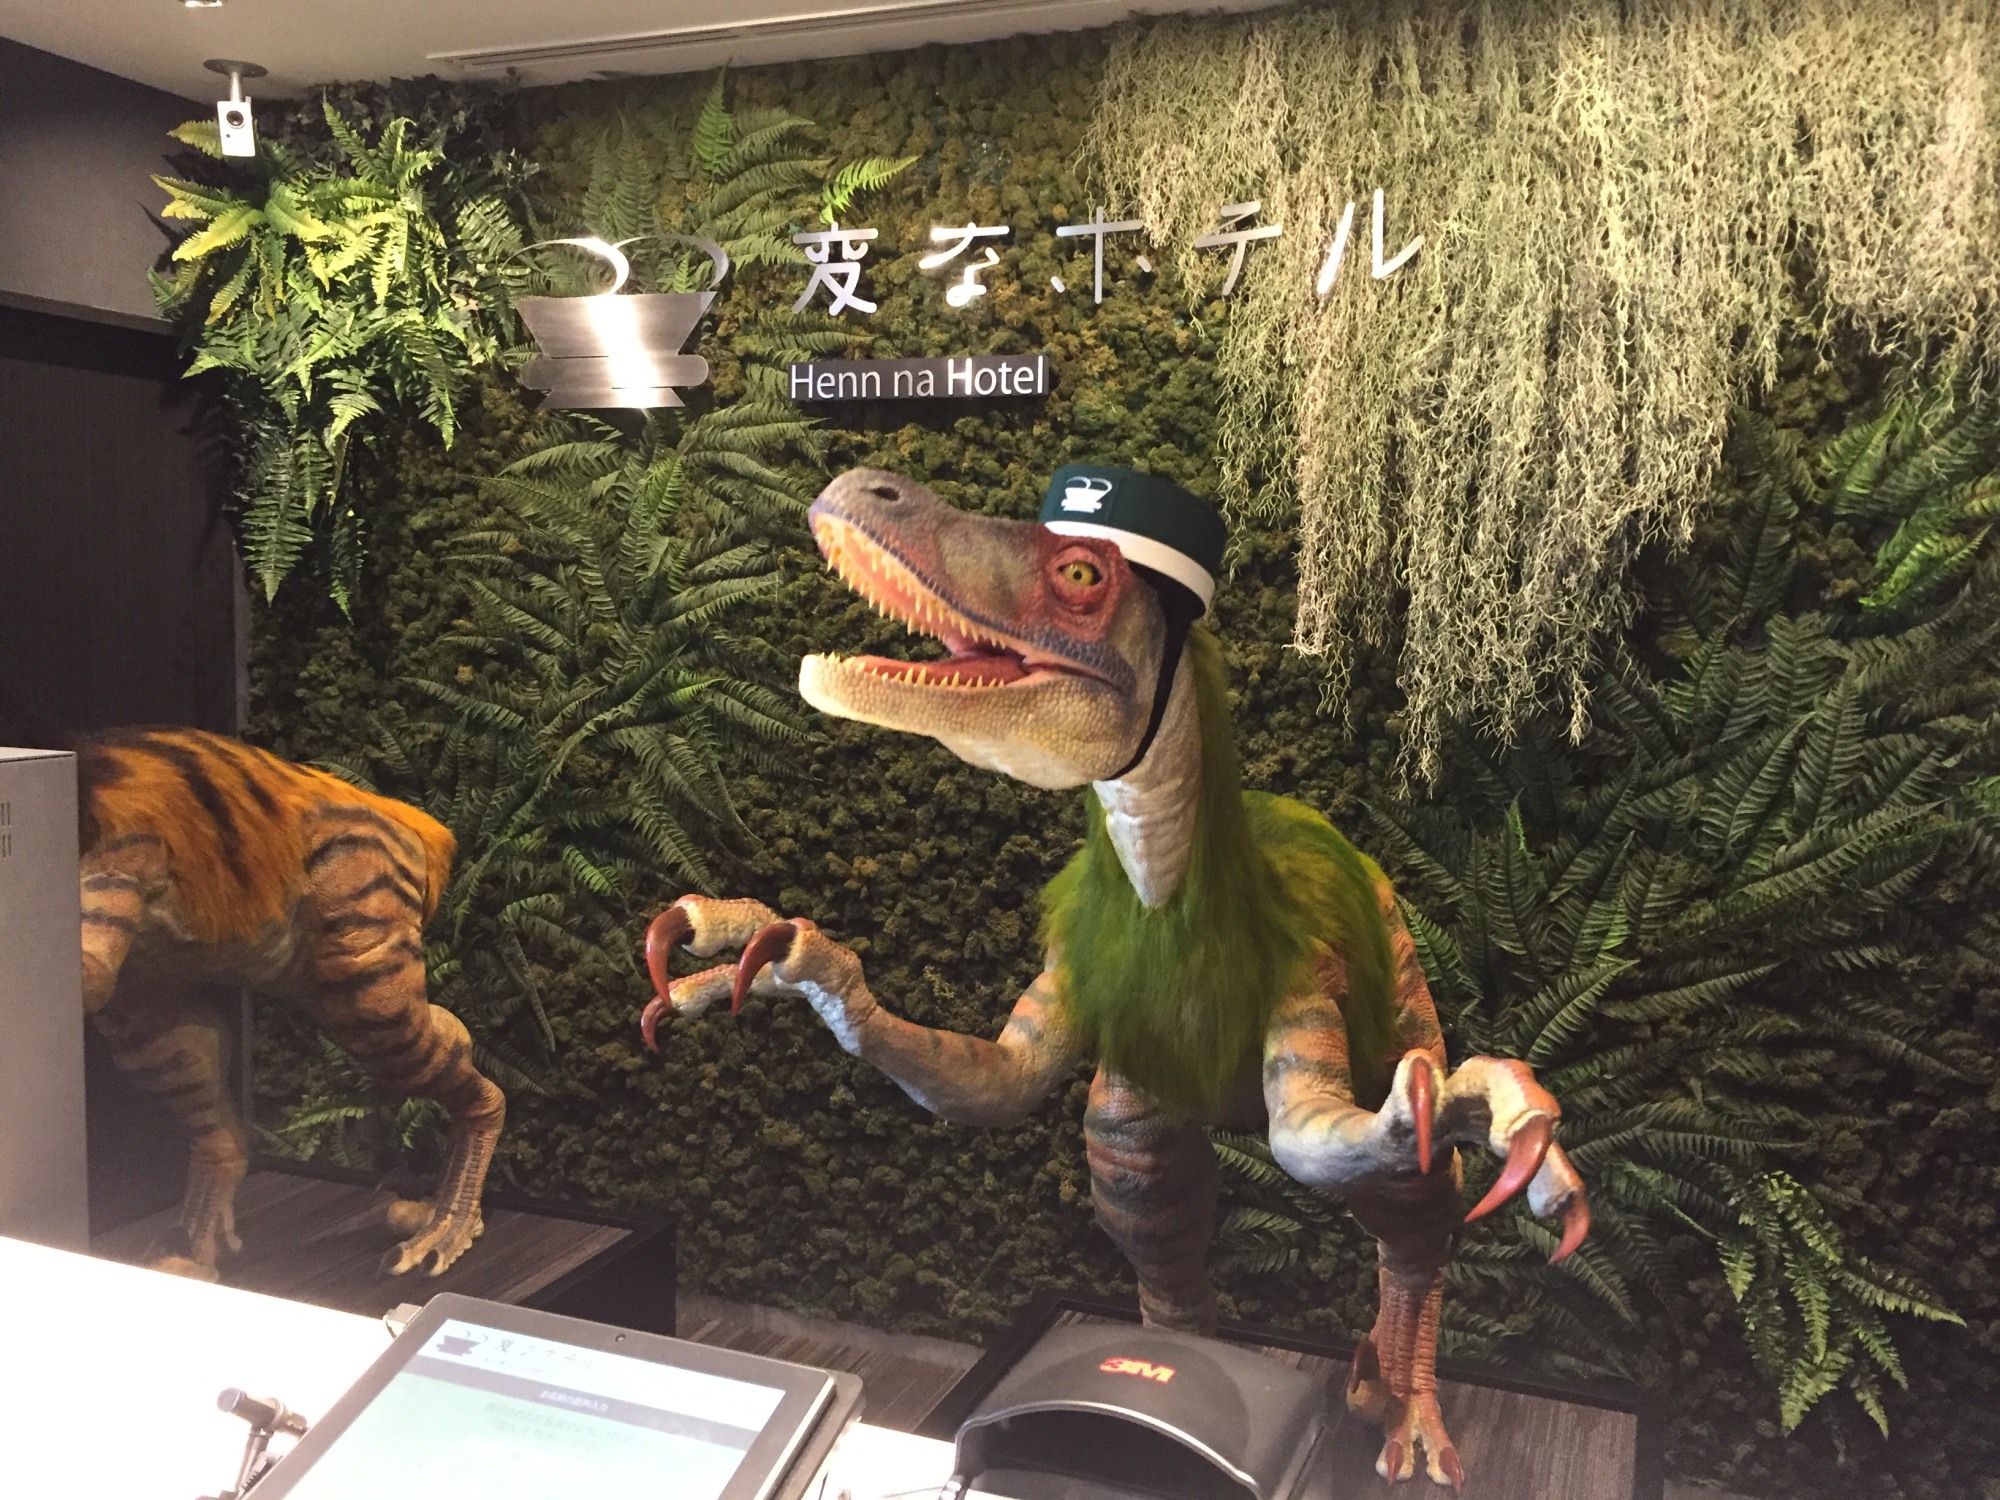 Dinosaur robots serve as receptionists during a media preview for the newly-opened Henn na Hotel in Urayasu, Chiba Prefecture, on Wednesday. | DAISUKE KIKUCHI